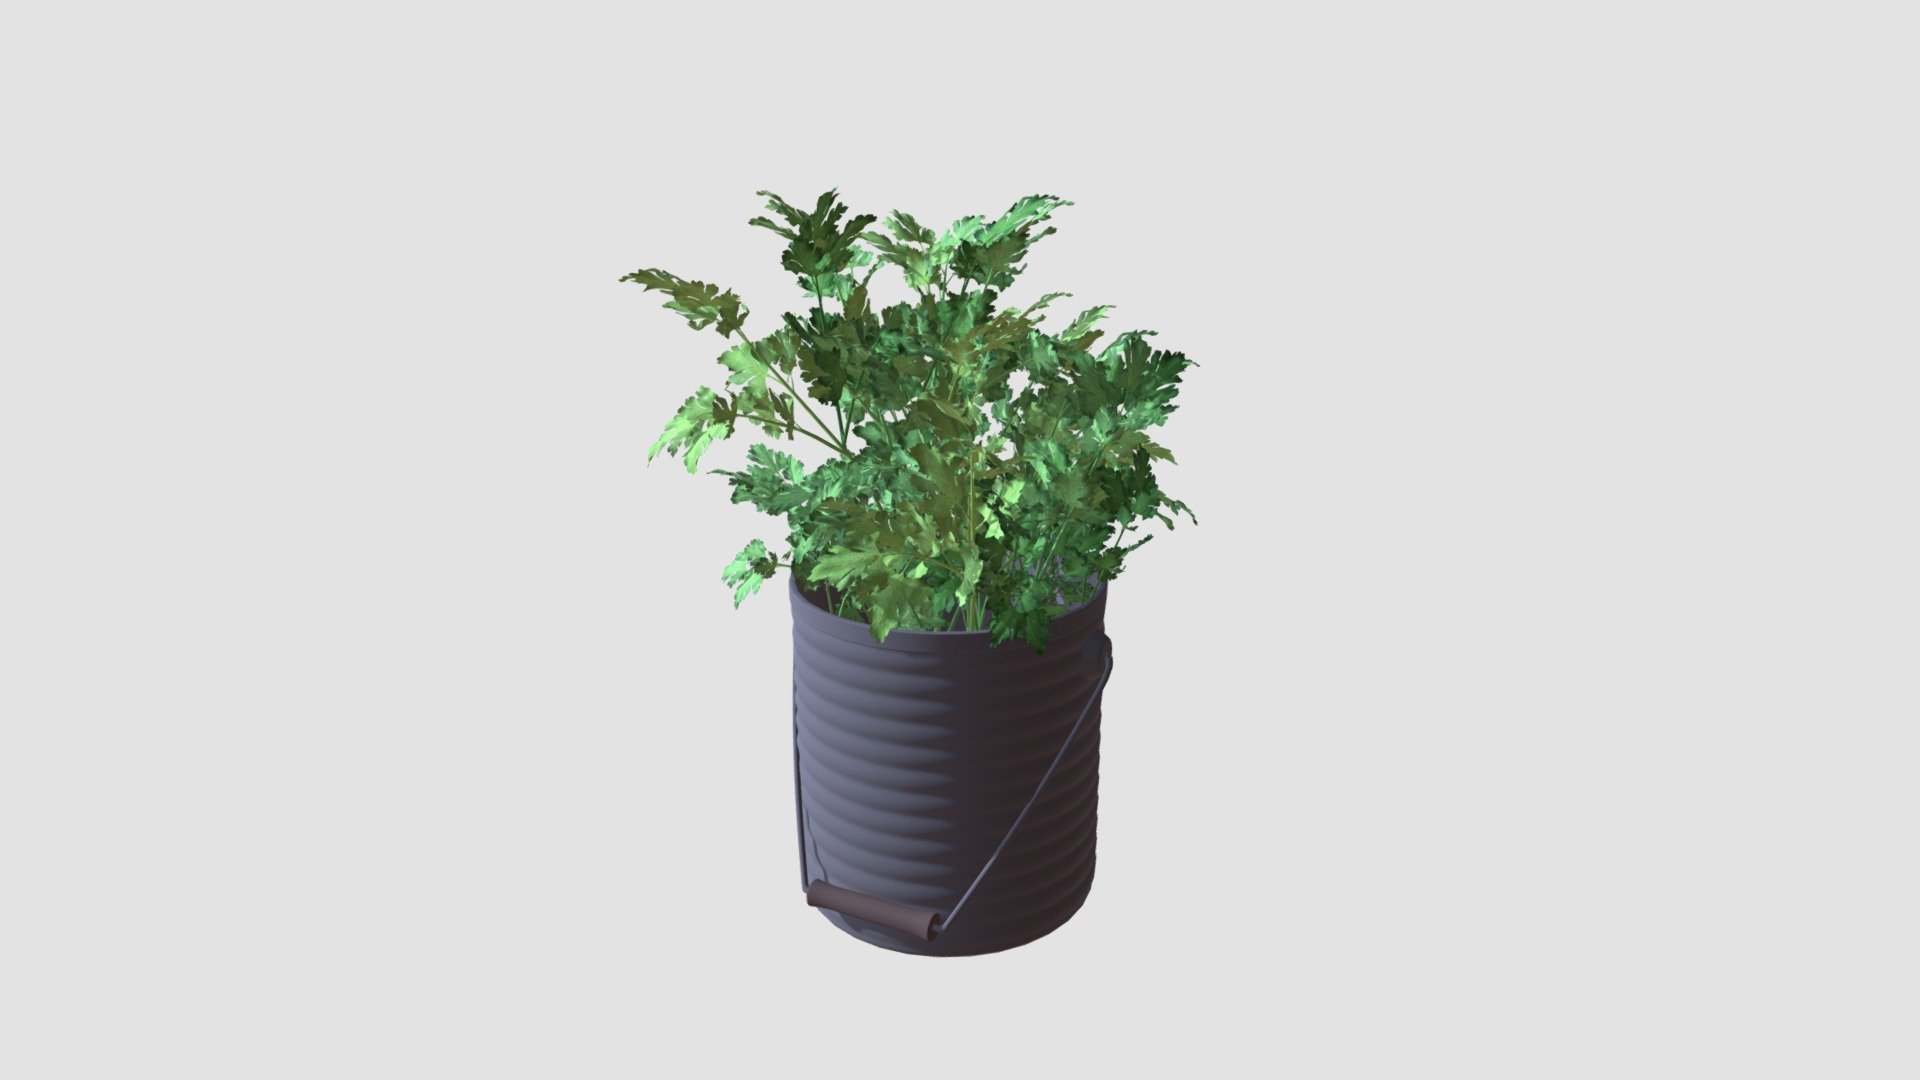 Highly detailed 3d model of green parsley with all textures, shaders and materials. It is ready to use, just put it into your scene 3d model